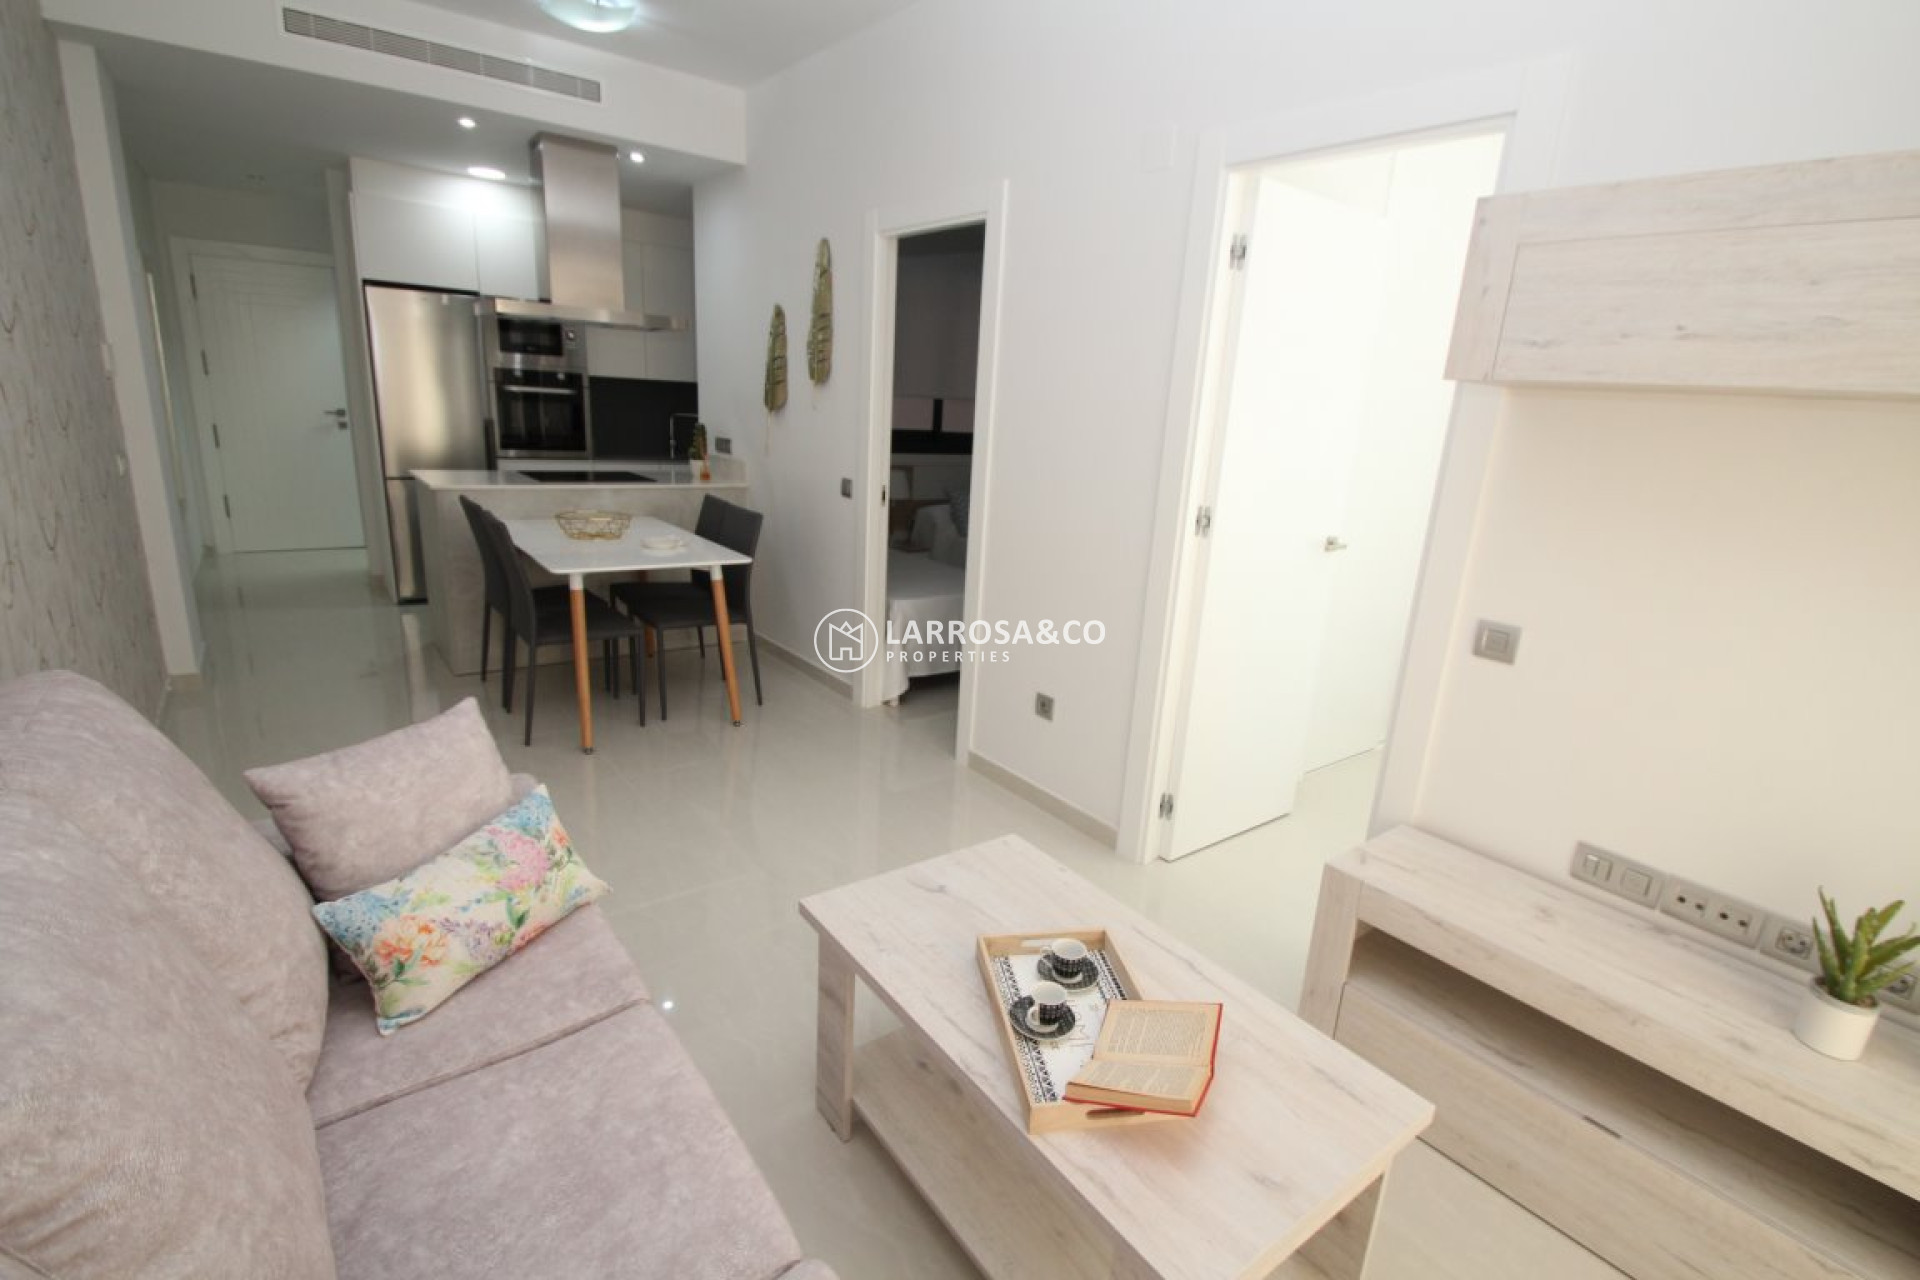 new-build-apartment-torrevieja-living-dining-room-kitchen-on2083